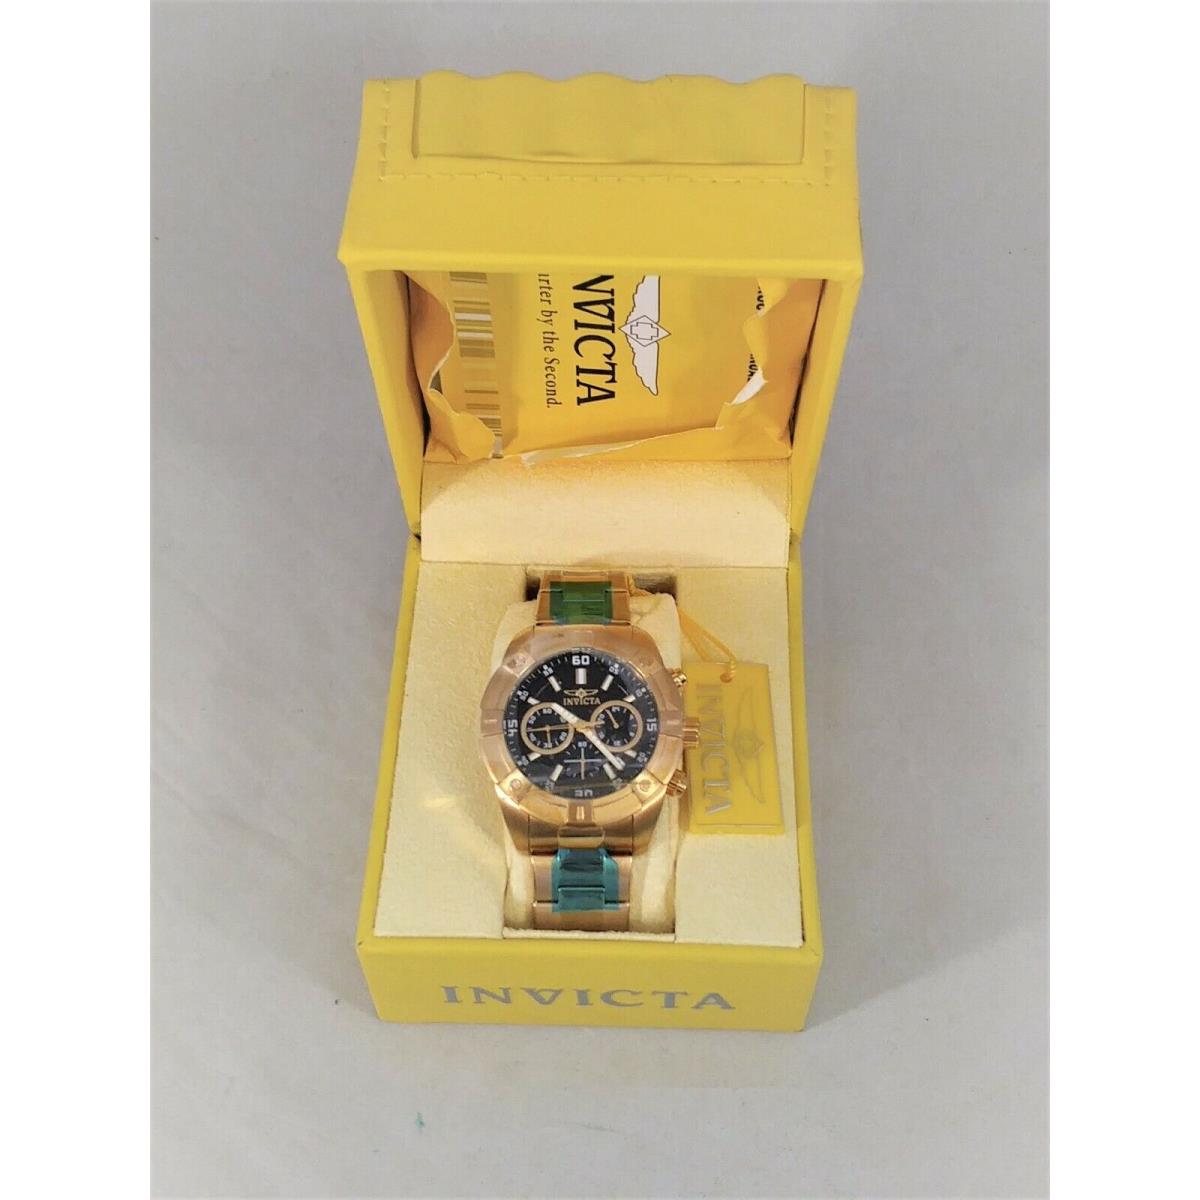 Invicta watch Specialty - Black Face, Gold Dial, Gold Band